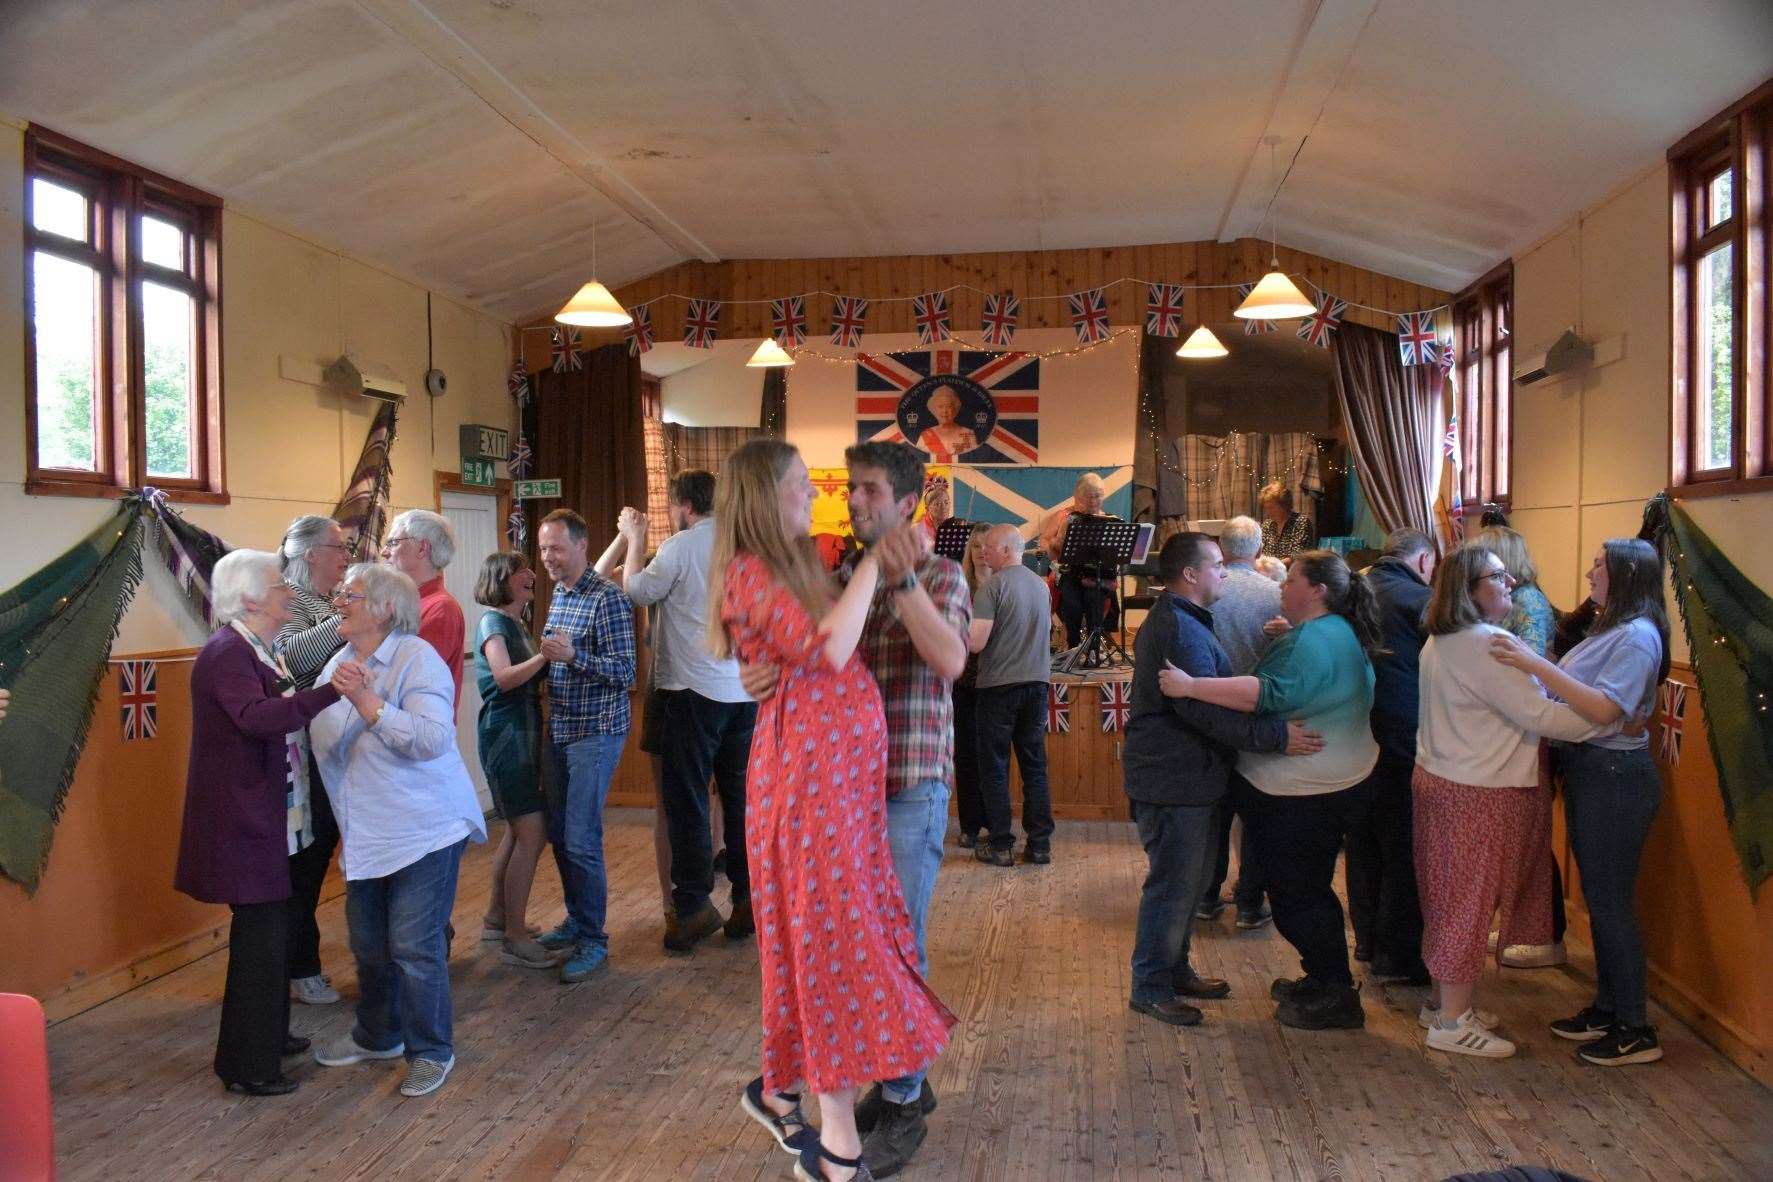 Dancing continued until well into the night at Culrain's jubilee celebration in the community hall.